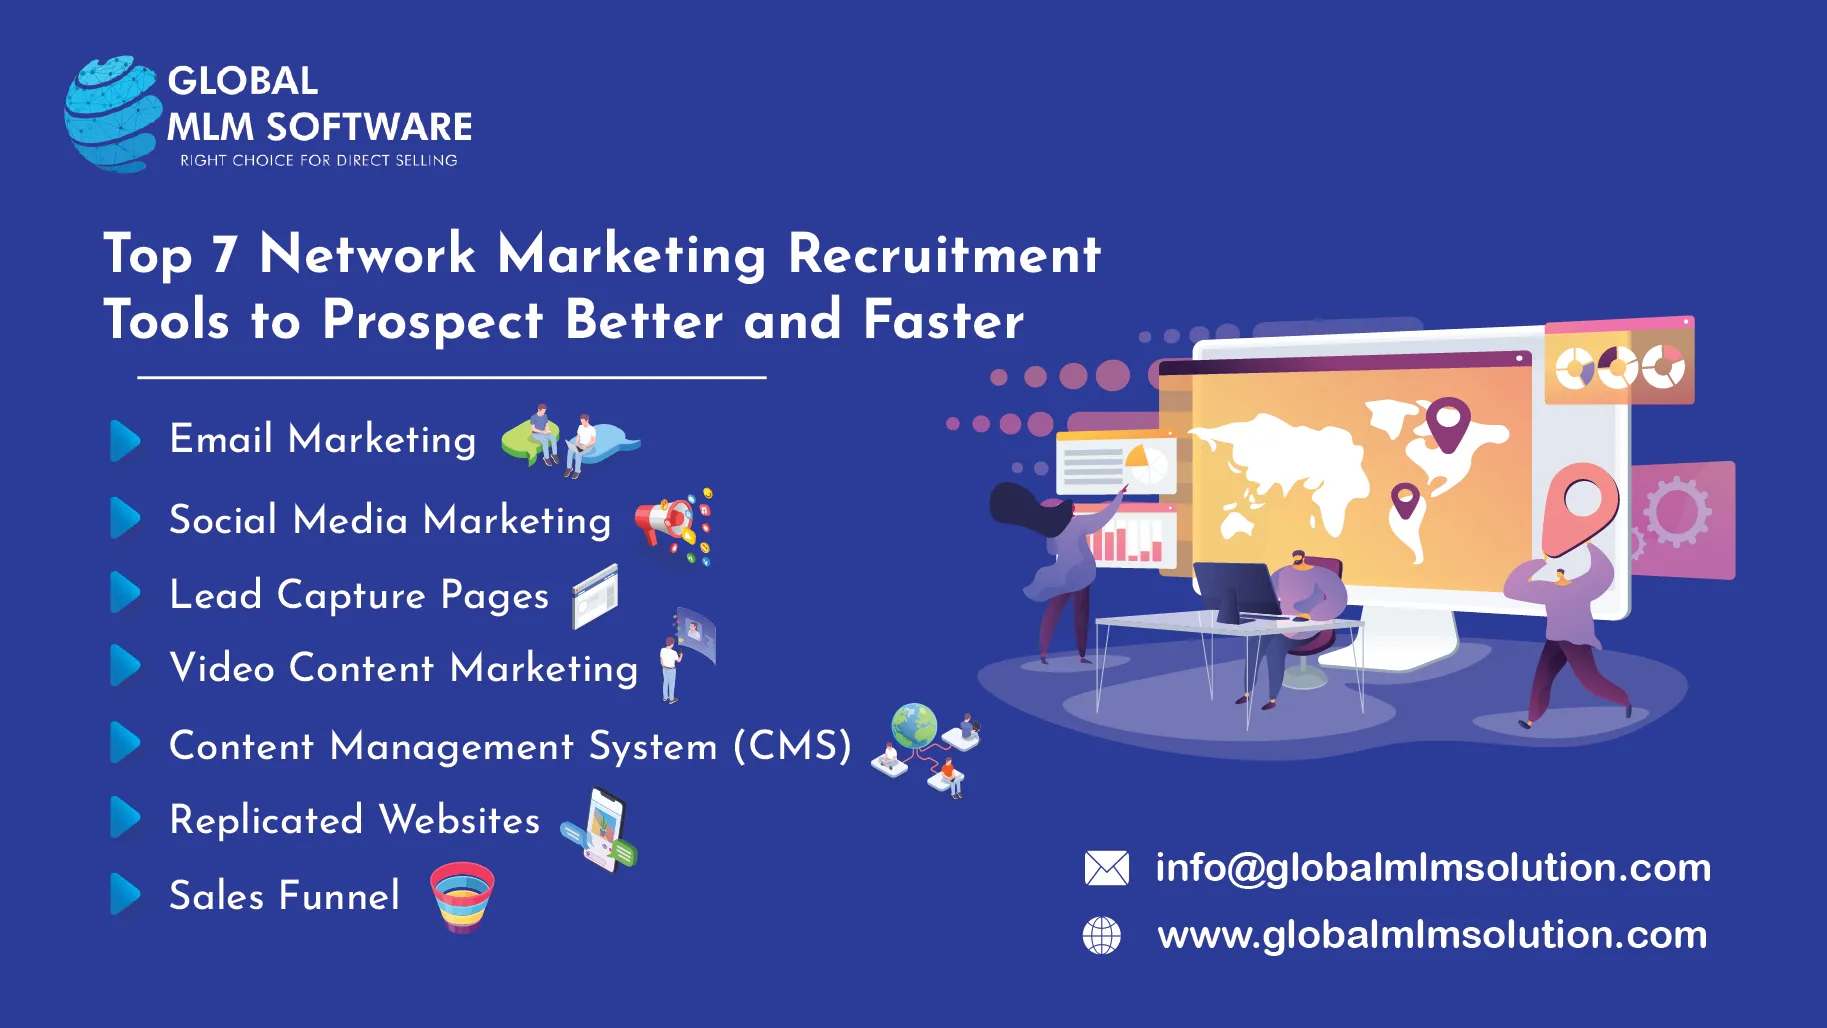 Top 7 Network Marketing Recruitment Tools to Prospect Better and Faster